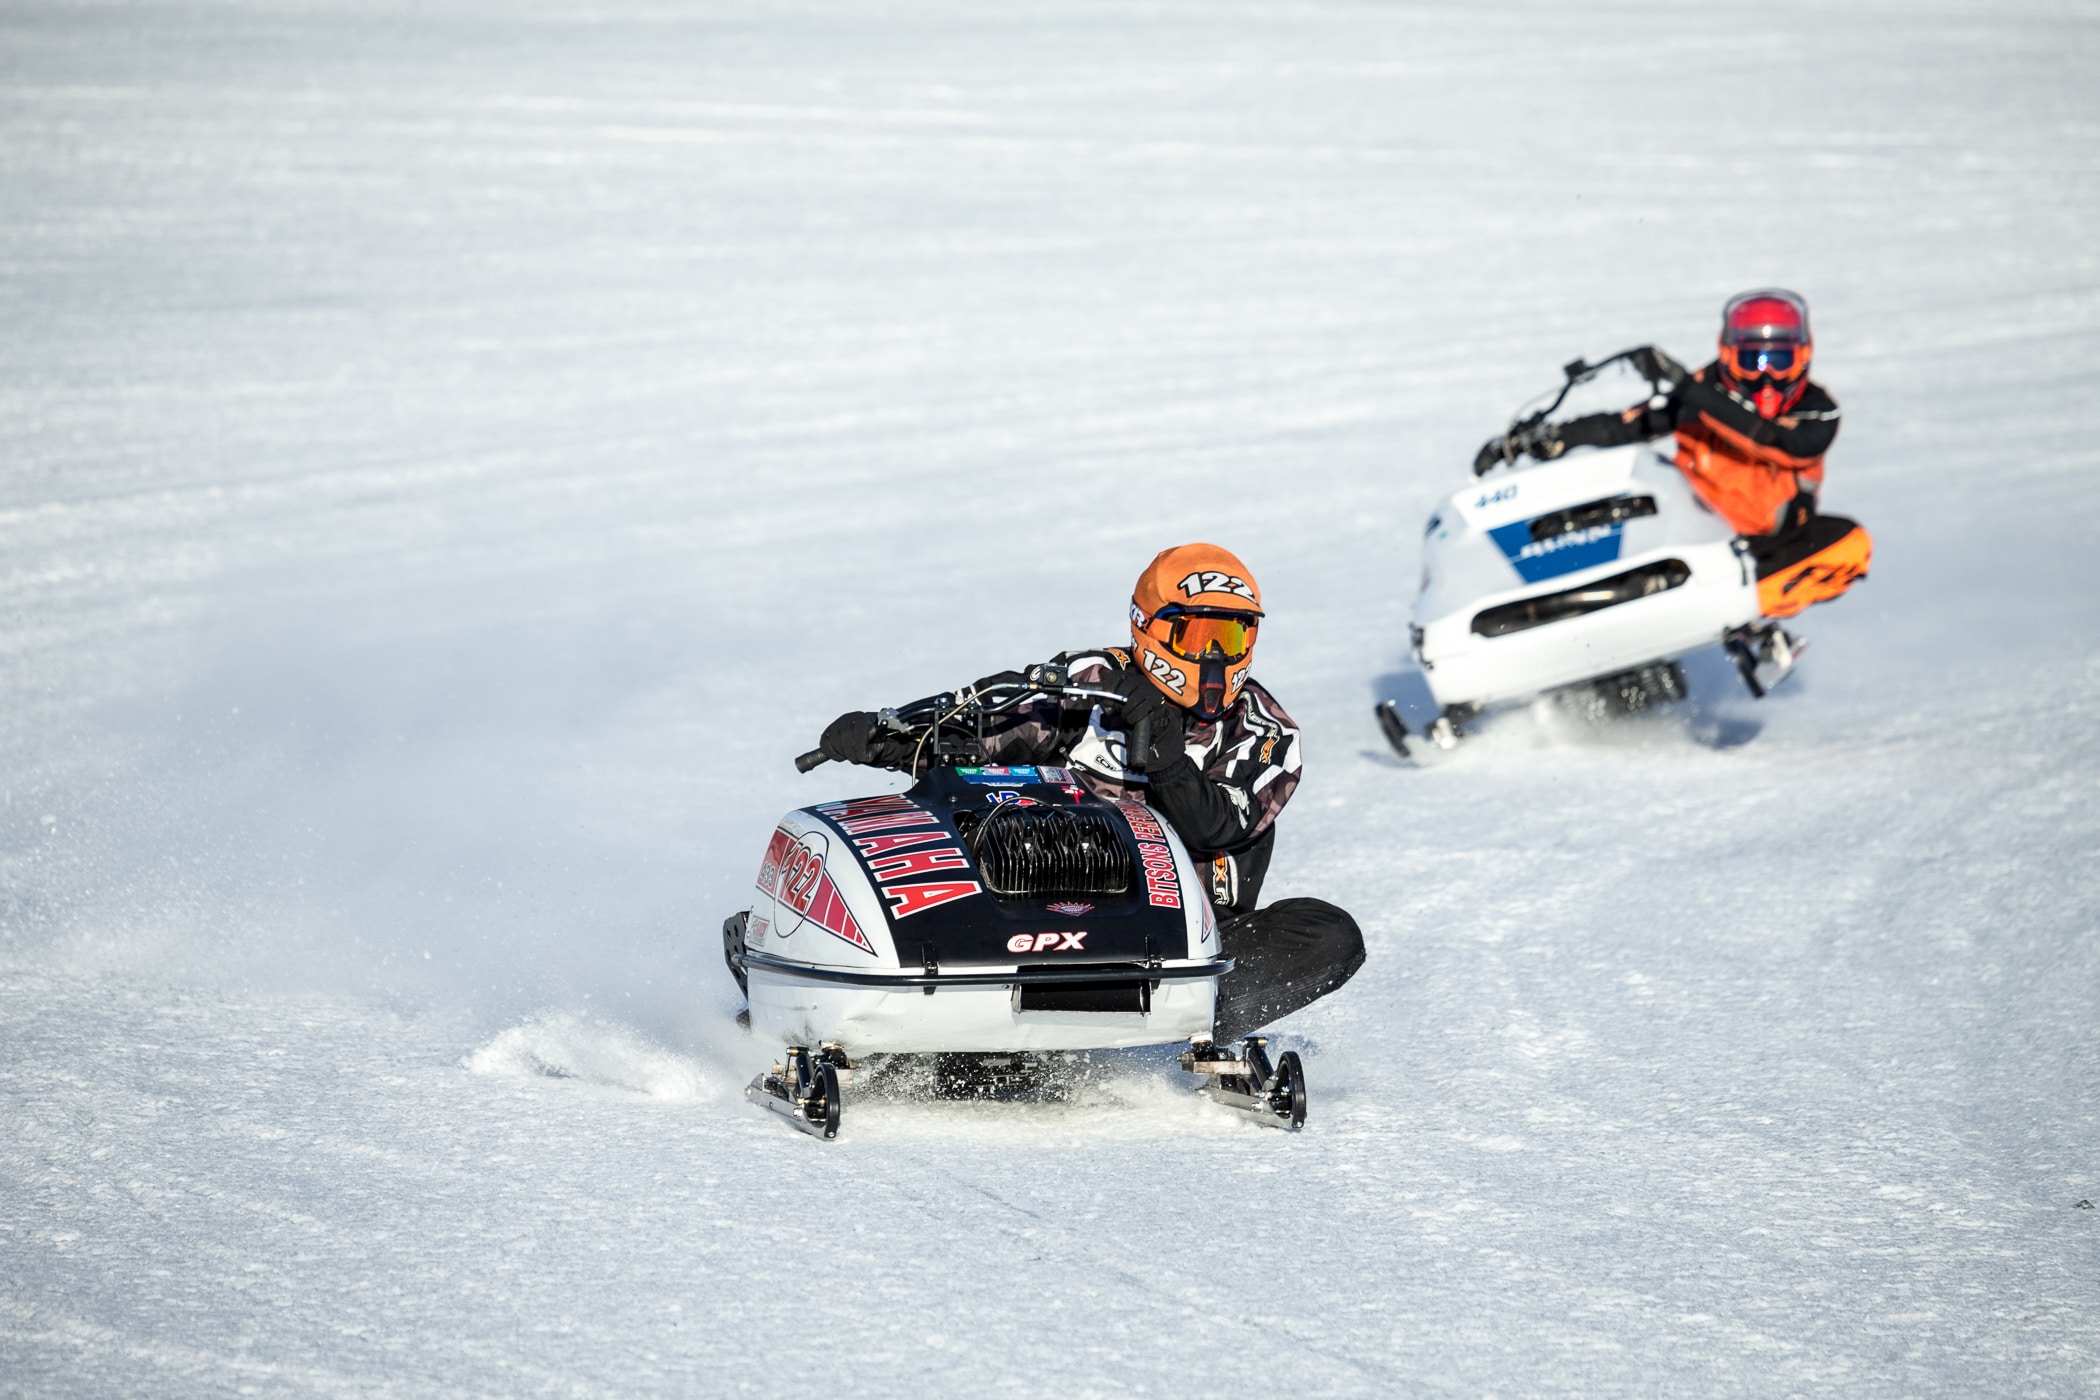 Two people riding snowmobiles on a snow covered field.